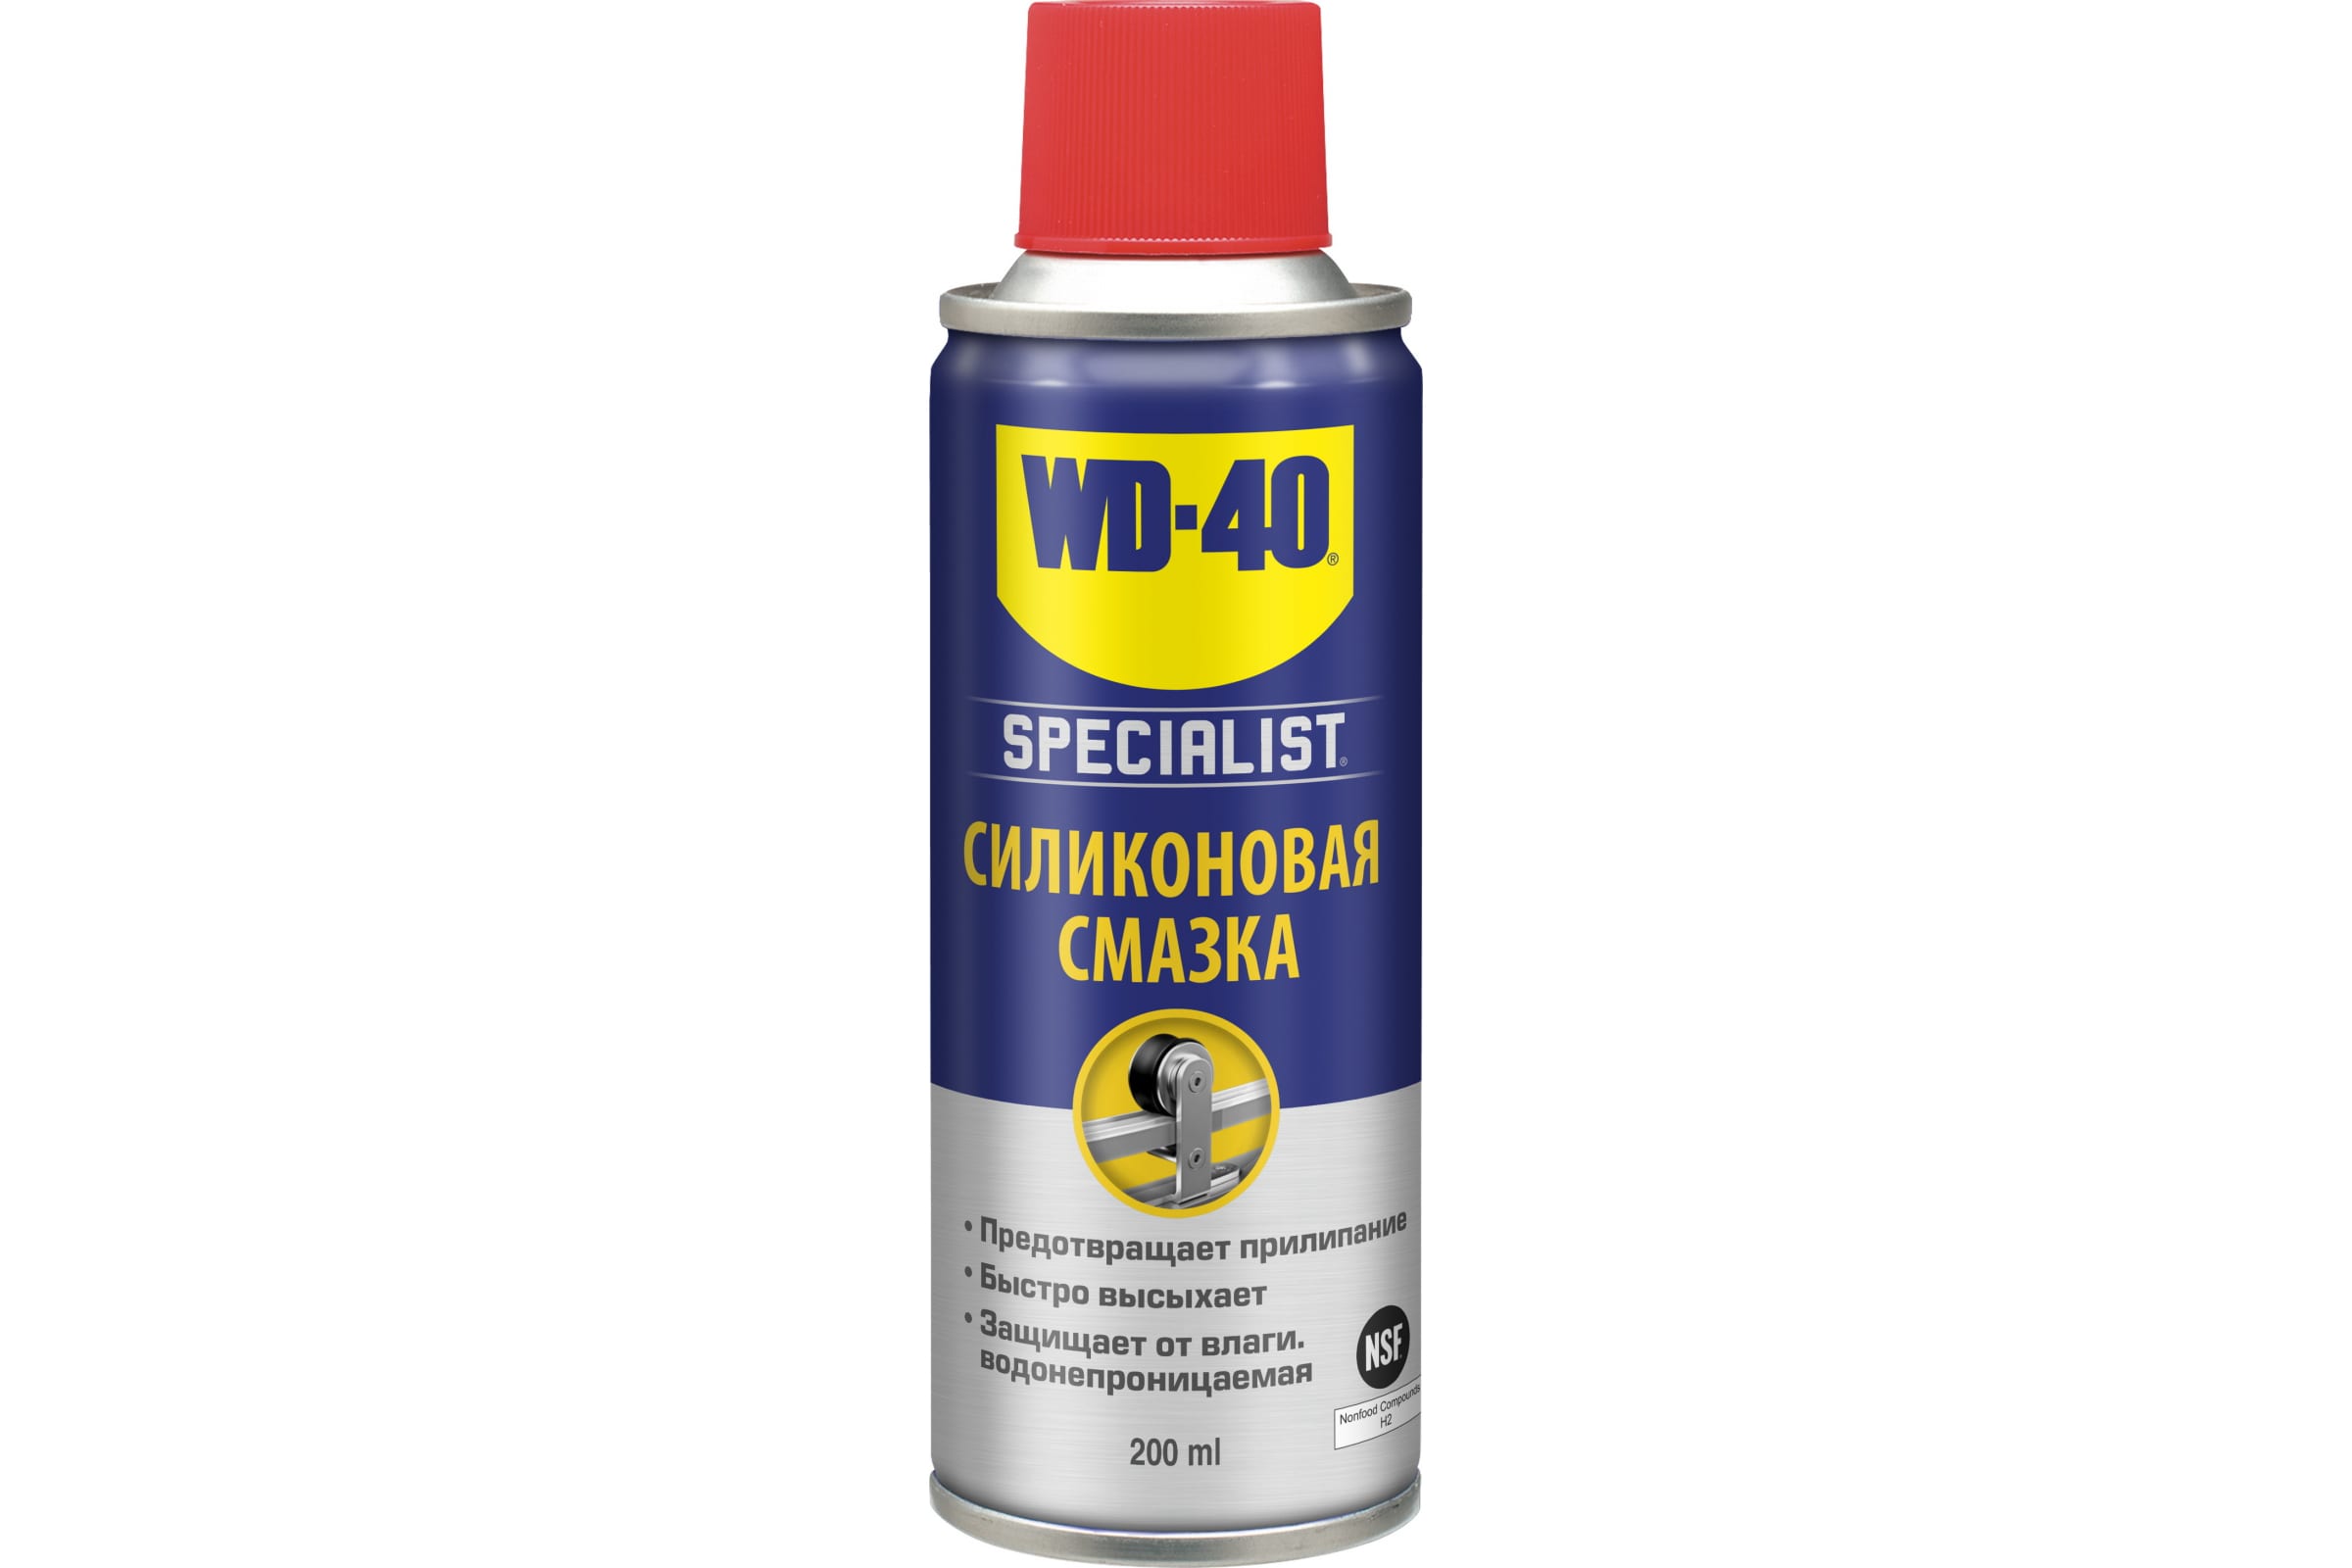 фото Смазка wd-40 specialist 200 мл + 50мл wd40 sp70126a wd-40 sp70126wd50